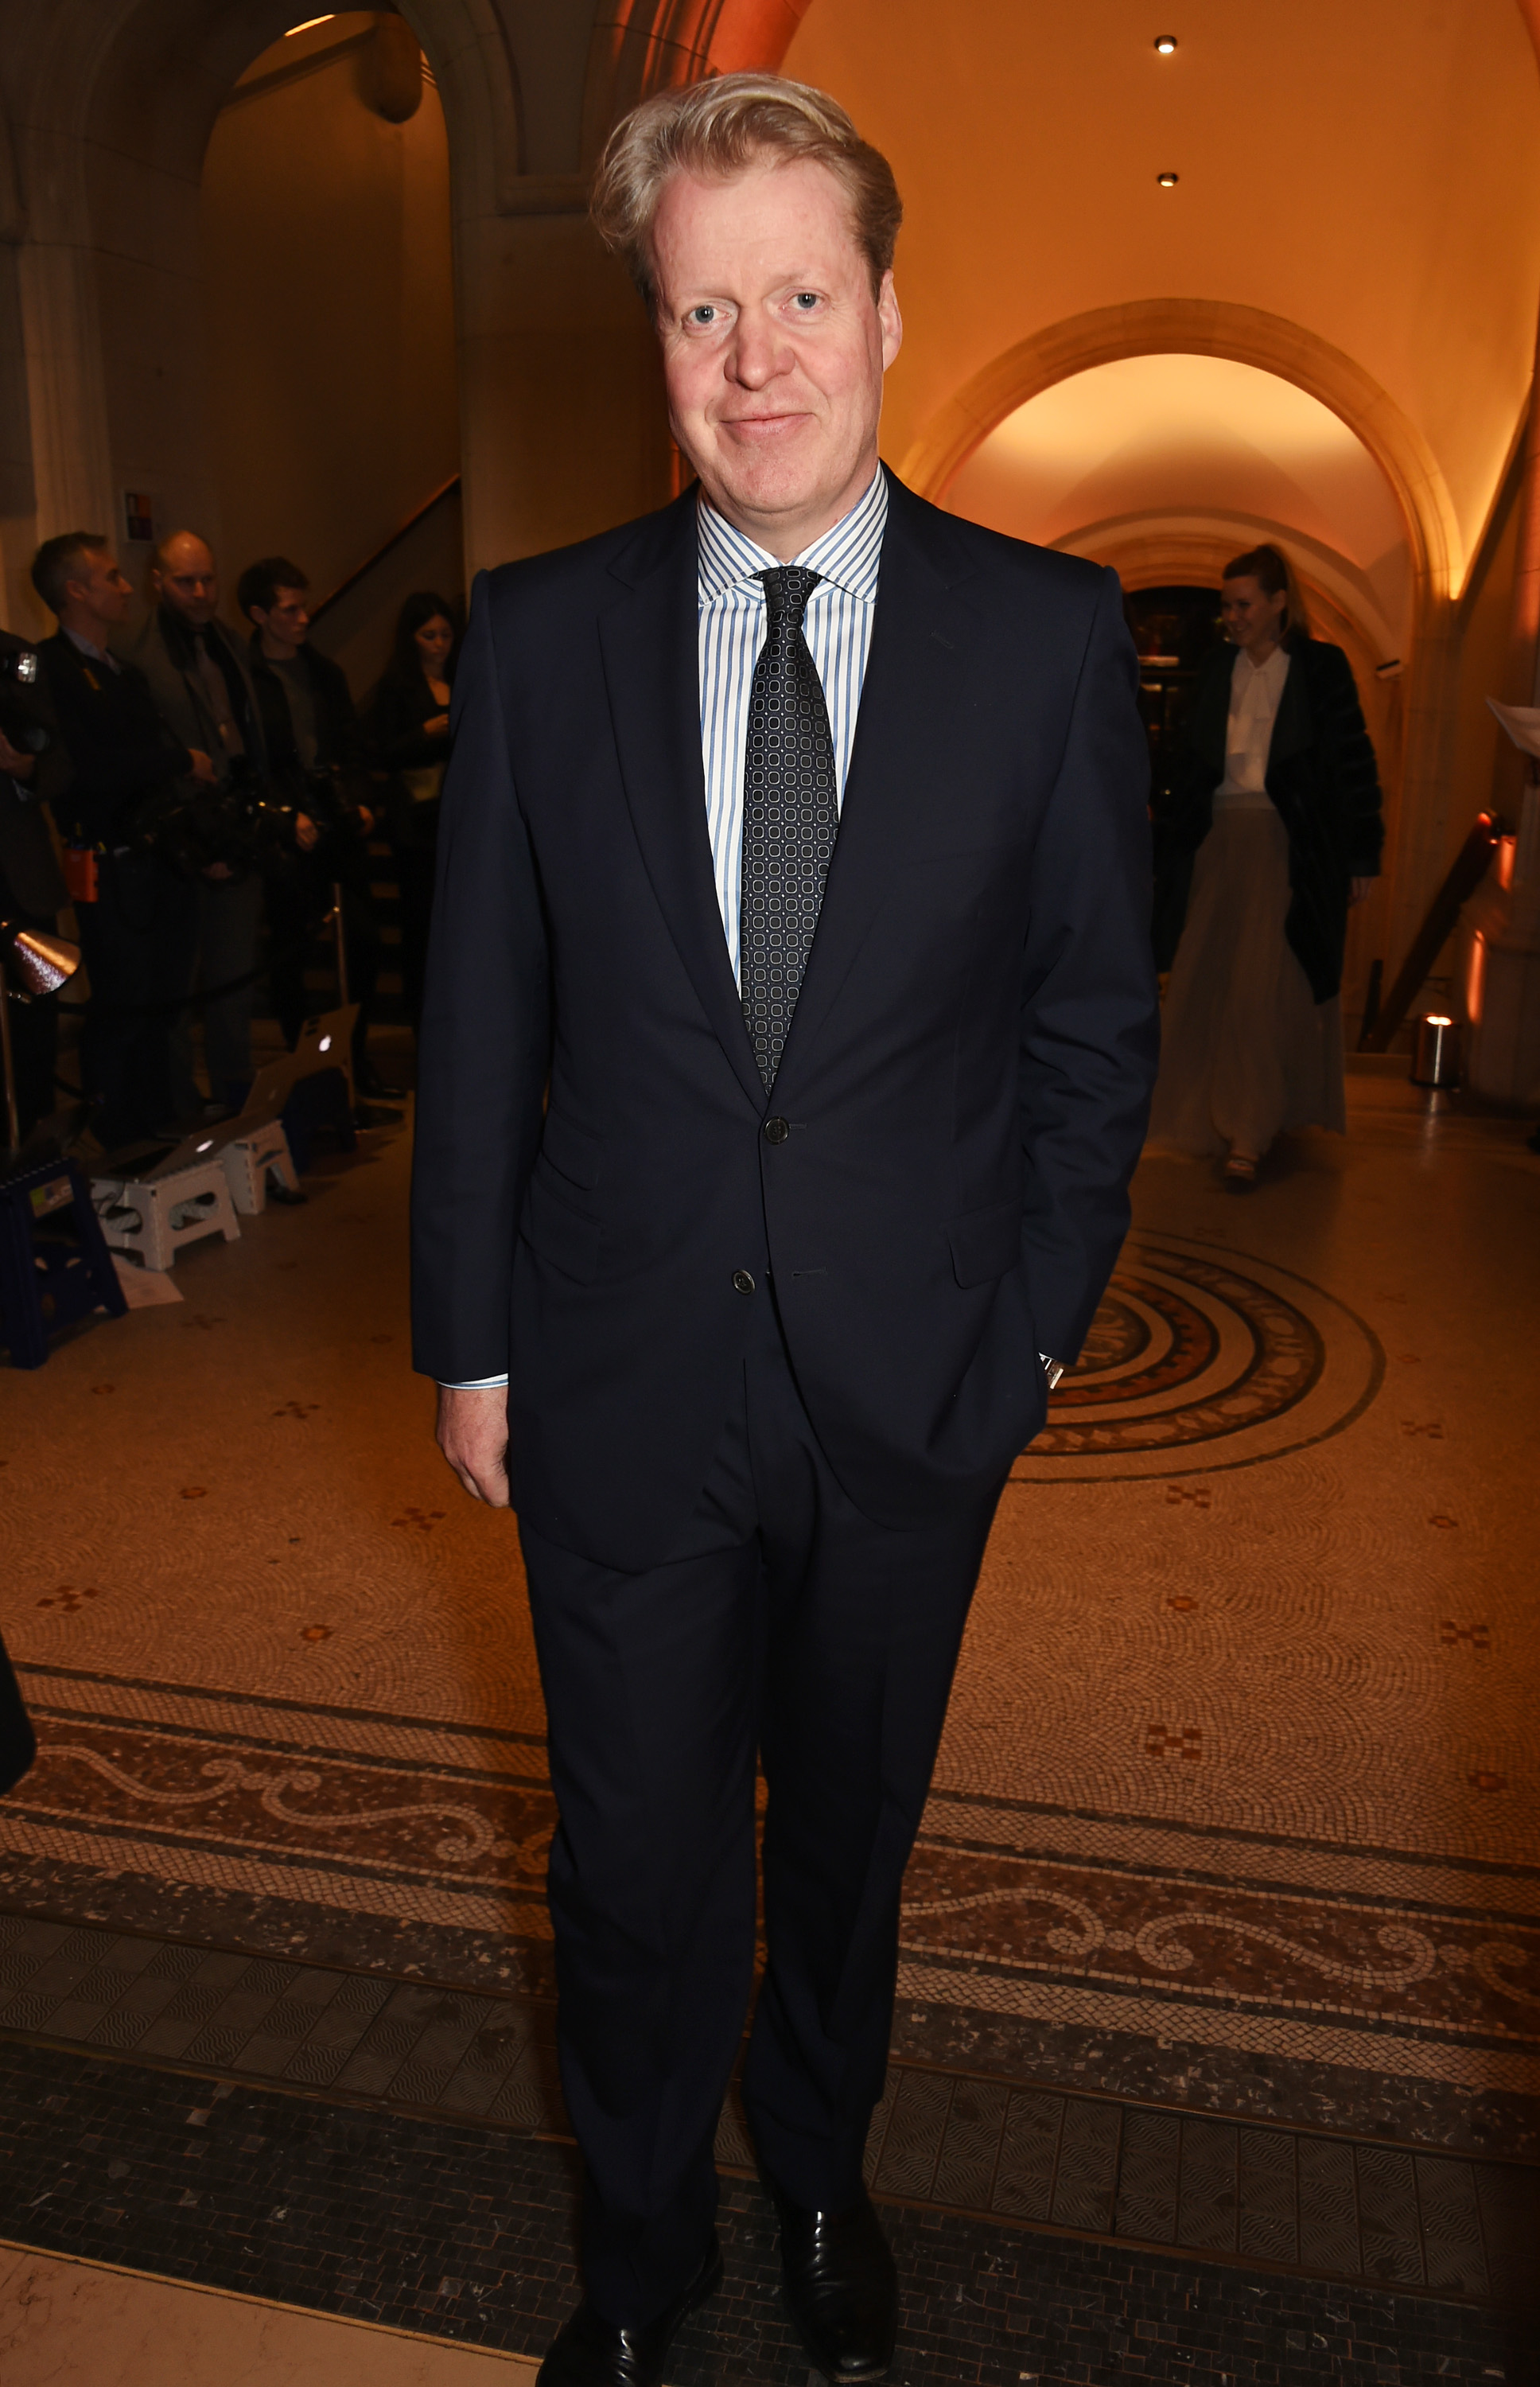 Charles Spencer, 9th Earl Spencer at a private viewing of "Vogue 100: A Century of Style" in London, England on February 9, 2016 | Source: Getty Images